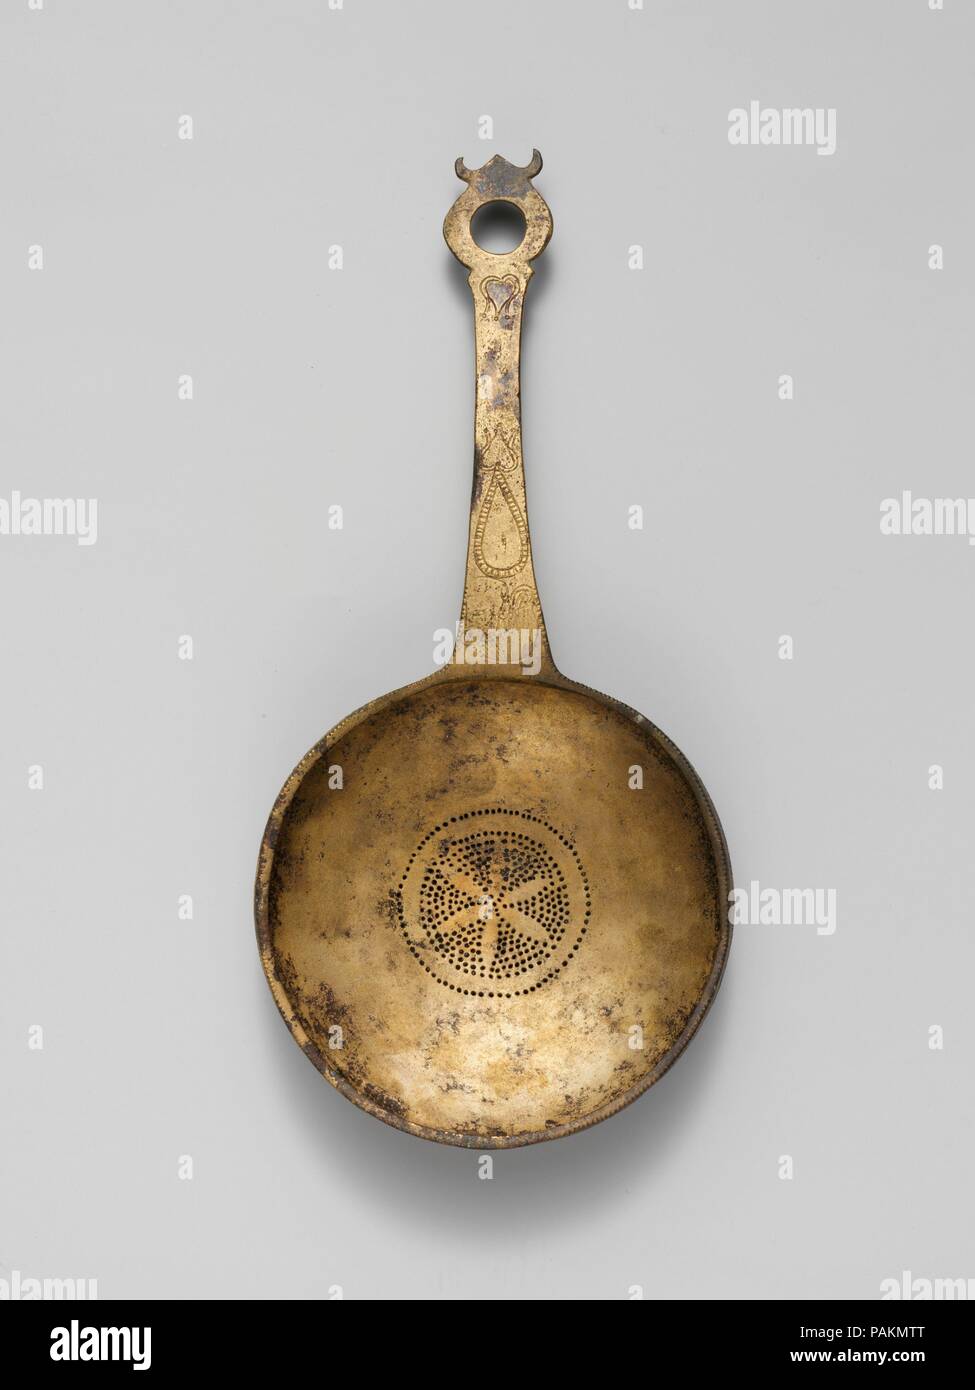 Strainer. Culture: Etruscan. Dimensions: Other: 11 9/16 x 5 3/8 in. (29.4 x 13.7 cm). Date: 5th century B.C.. Museum: Metropolitan Museum of Art, New York, USA. Stock Photo